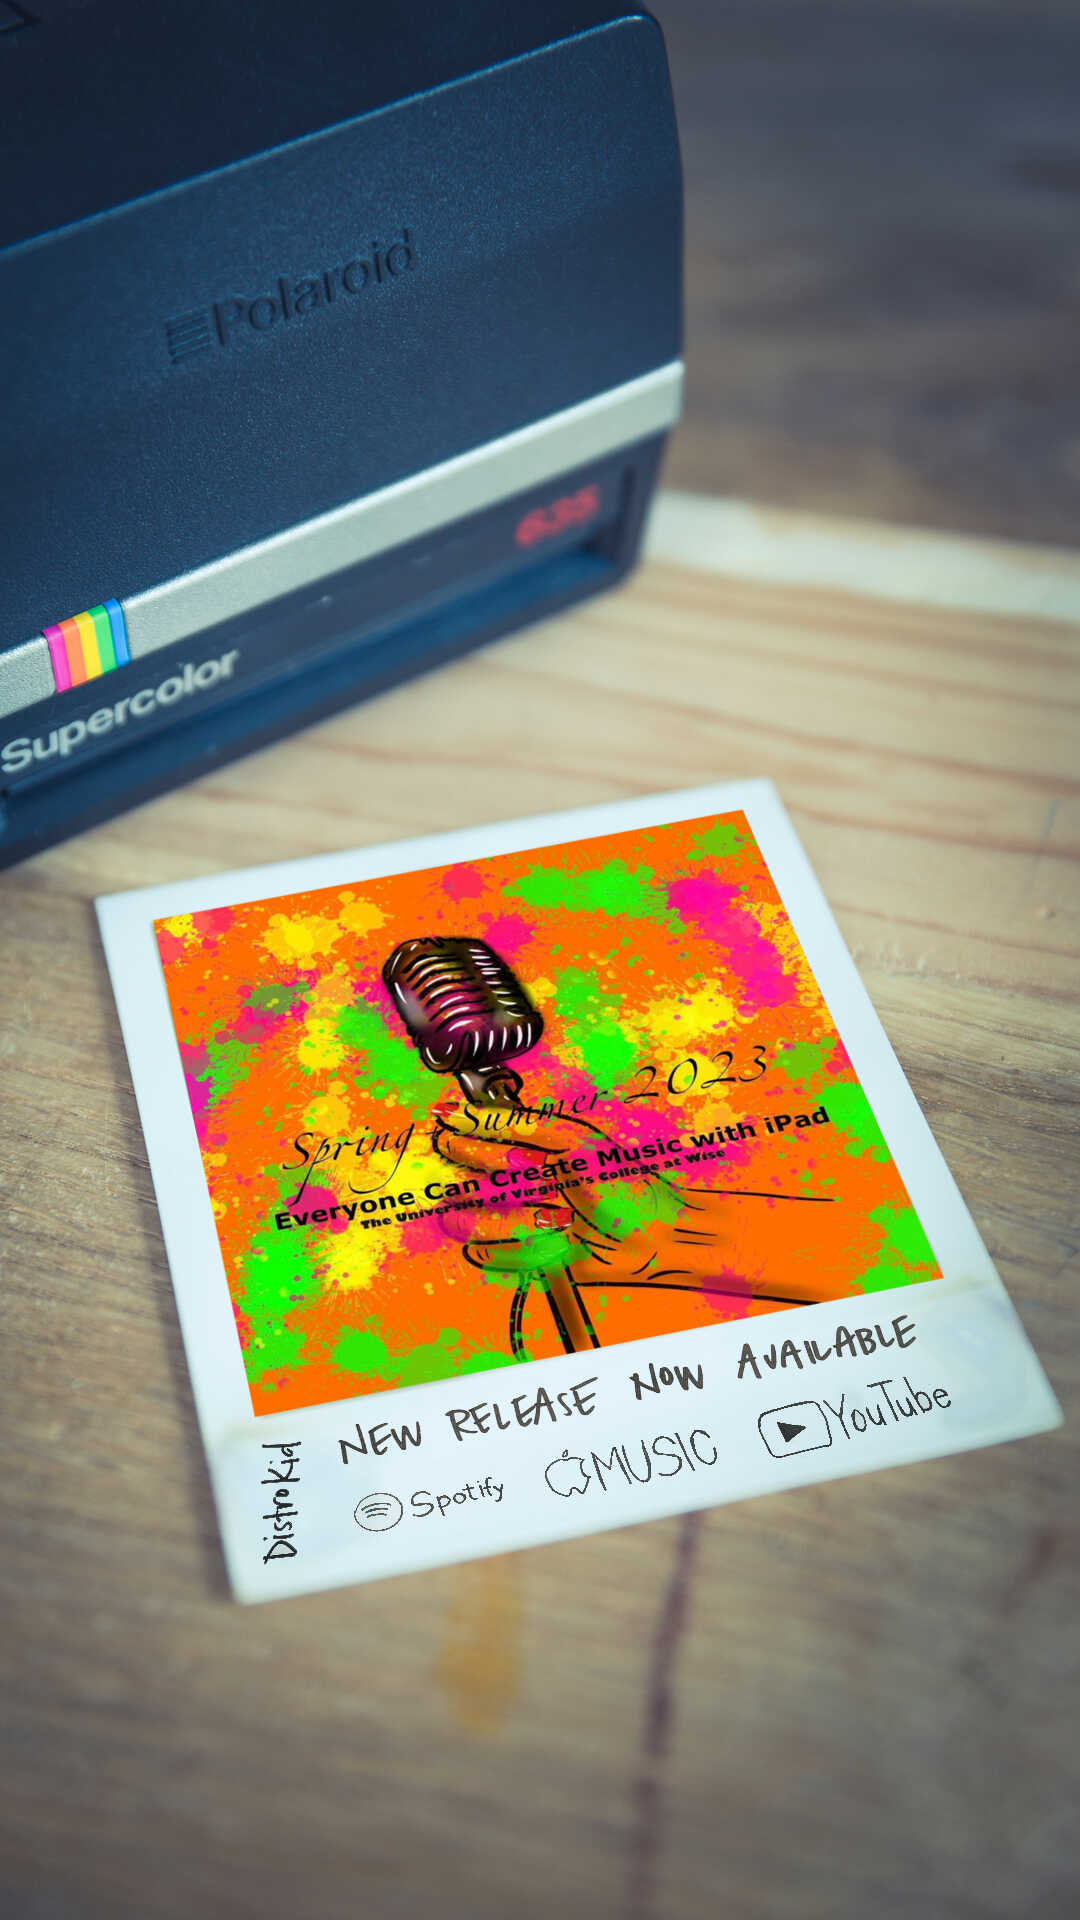 Polaroid photo of the Spring+Summer 2023 Everyone Can Create Music With iPad Album cover.